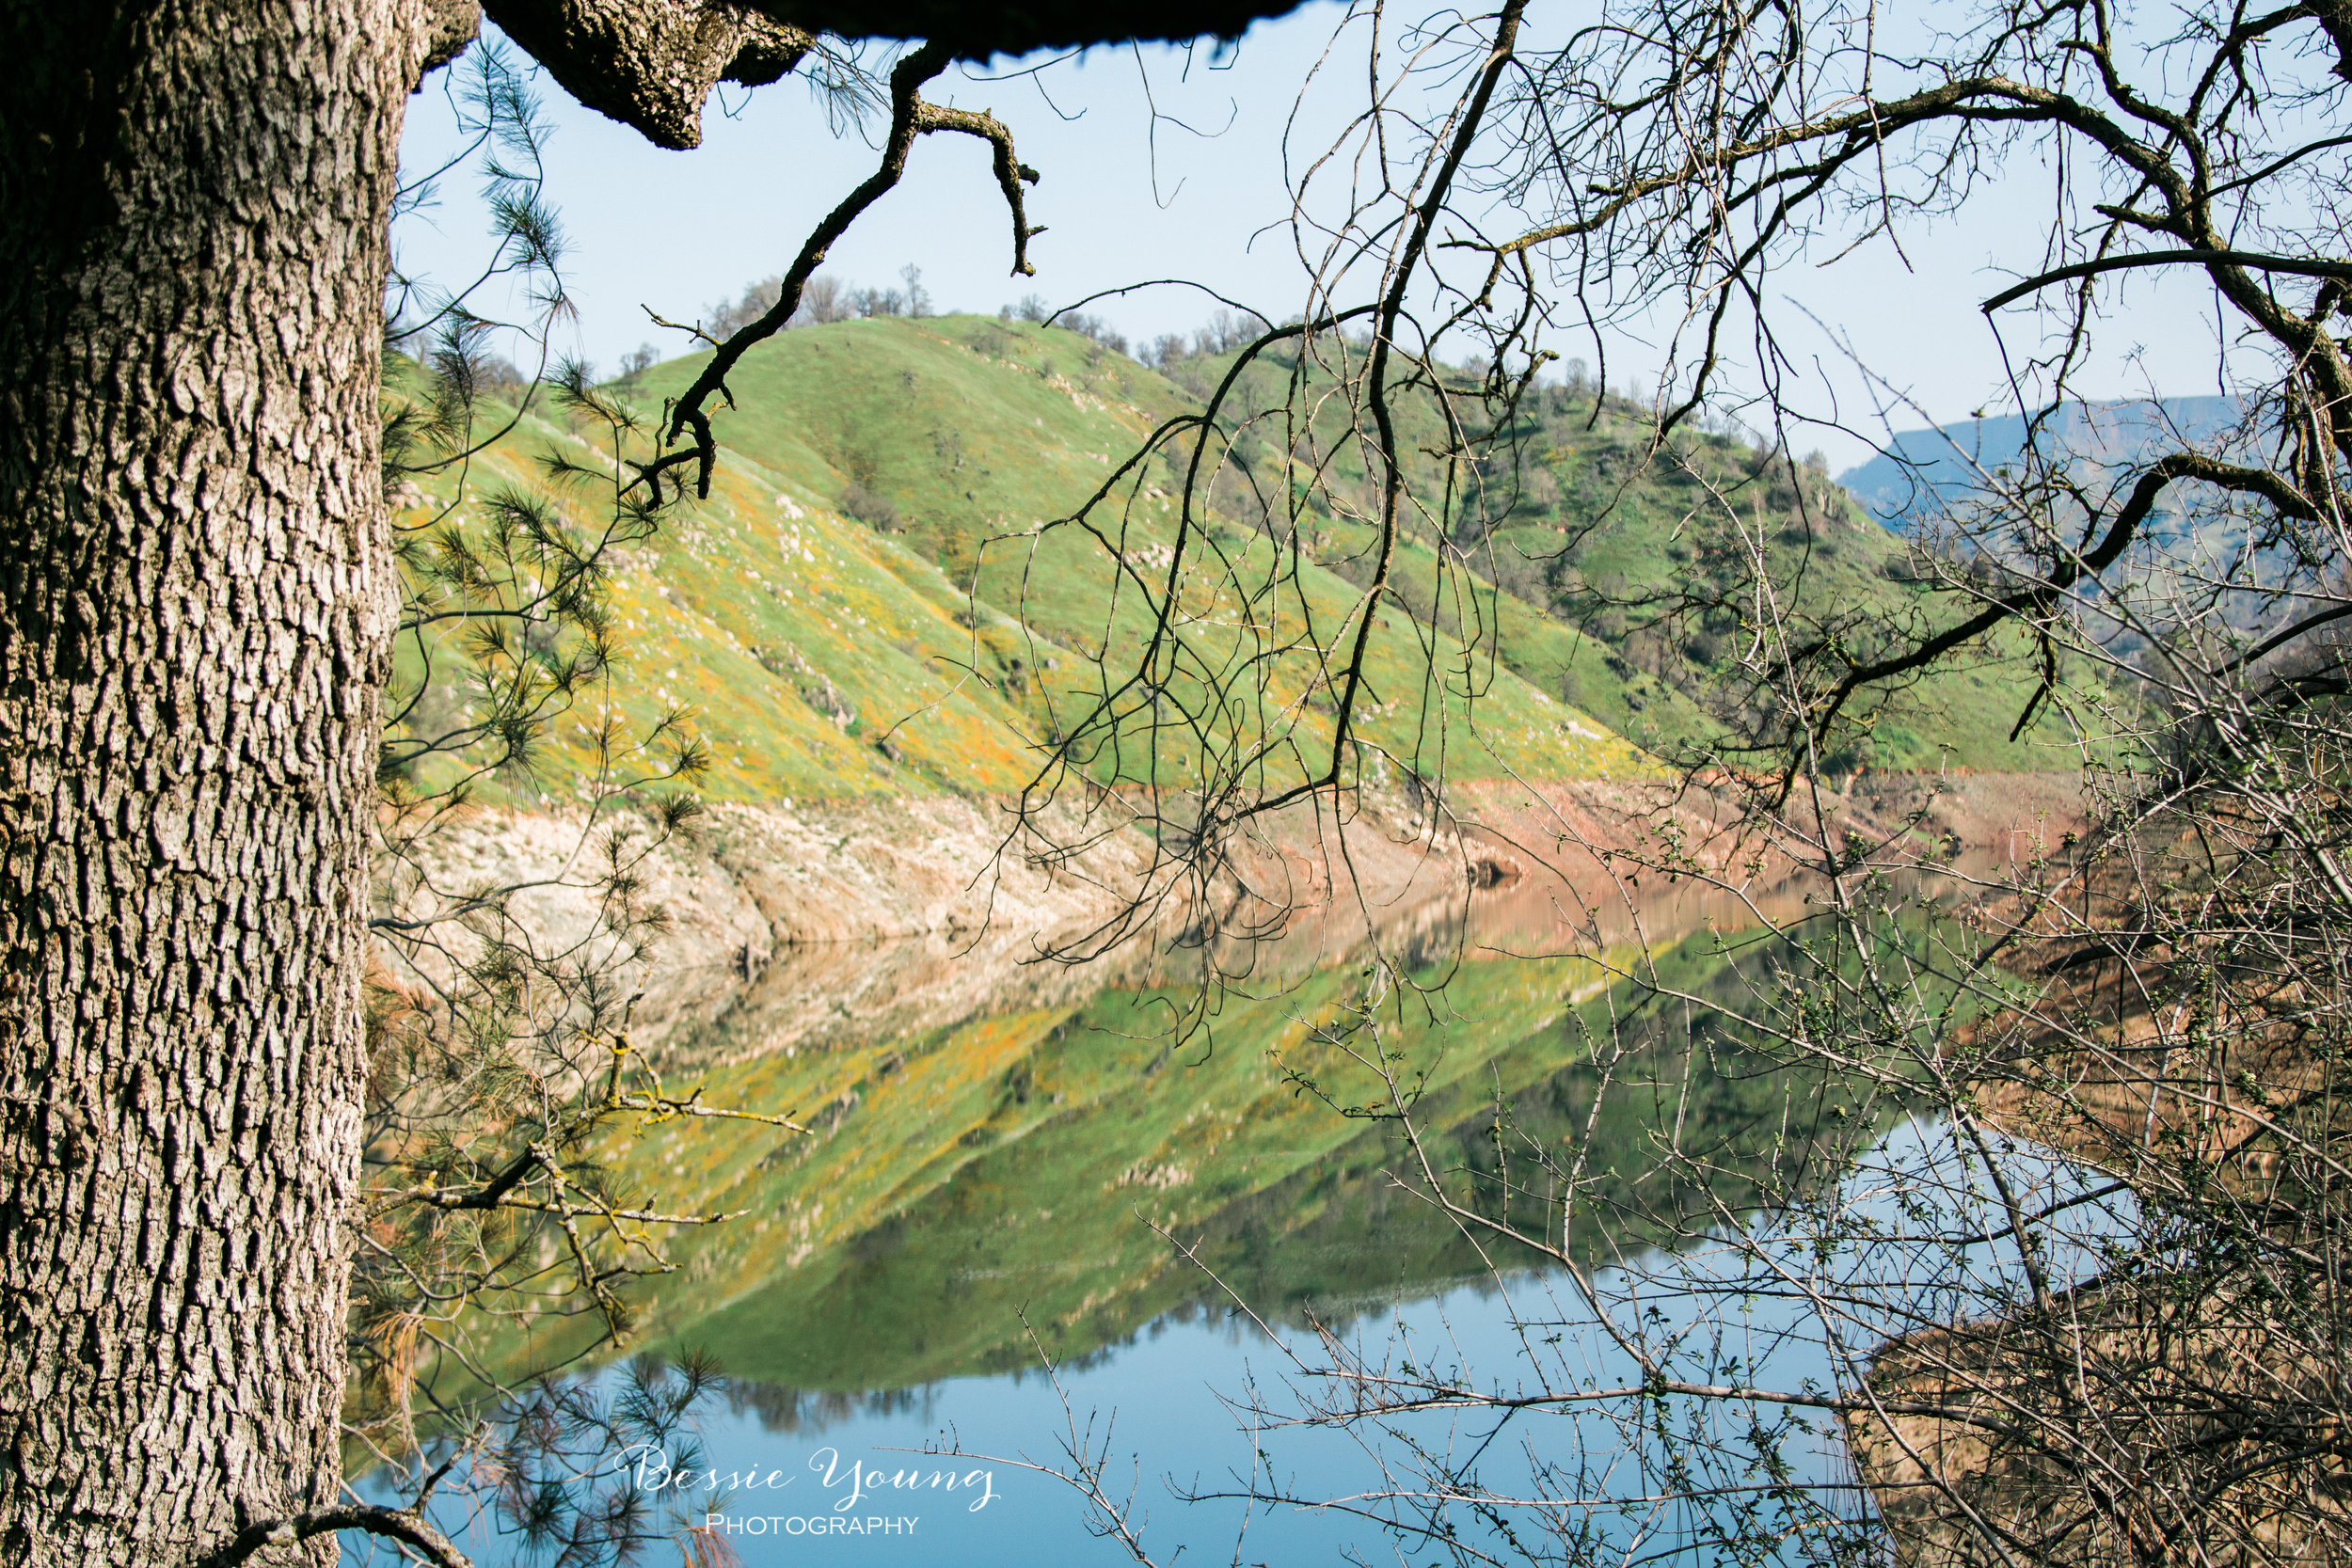 San Joaquin River Trail - California Hiking Trail by Bessie Young Photography